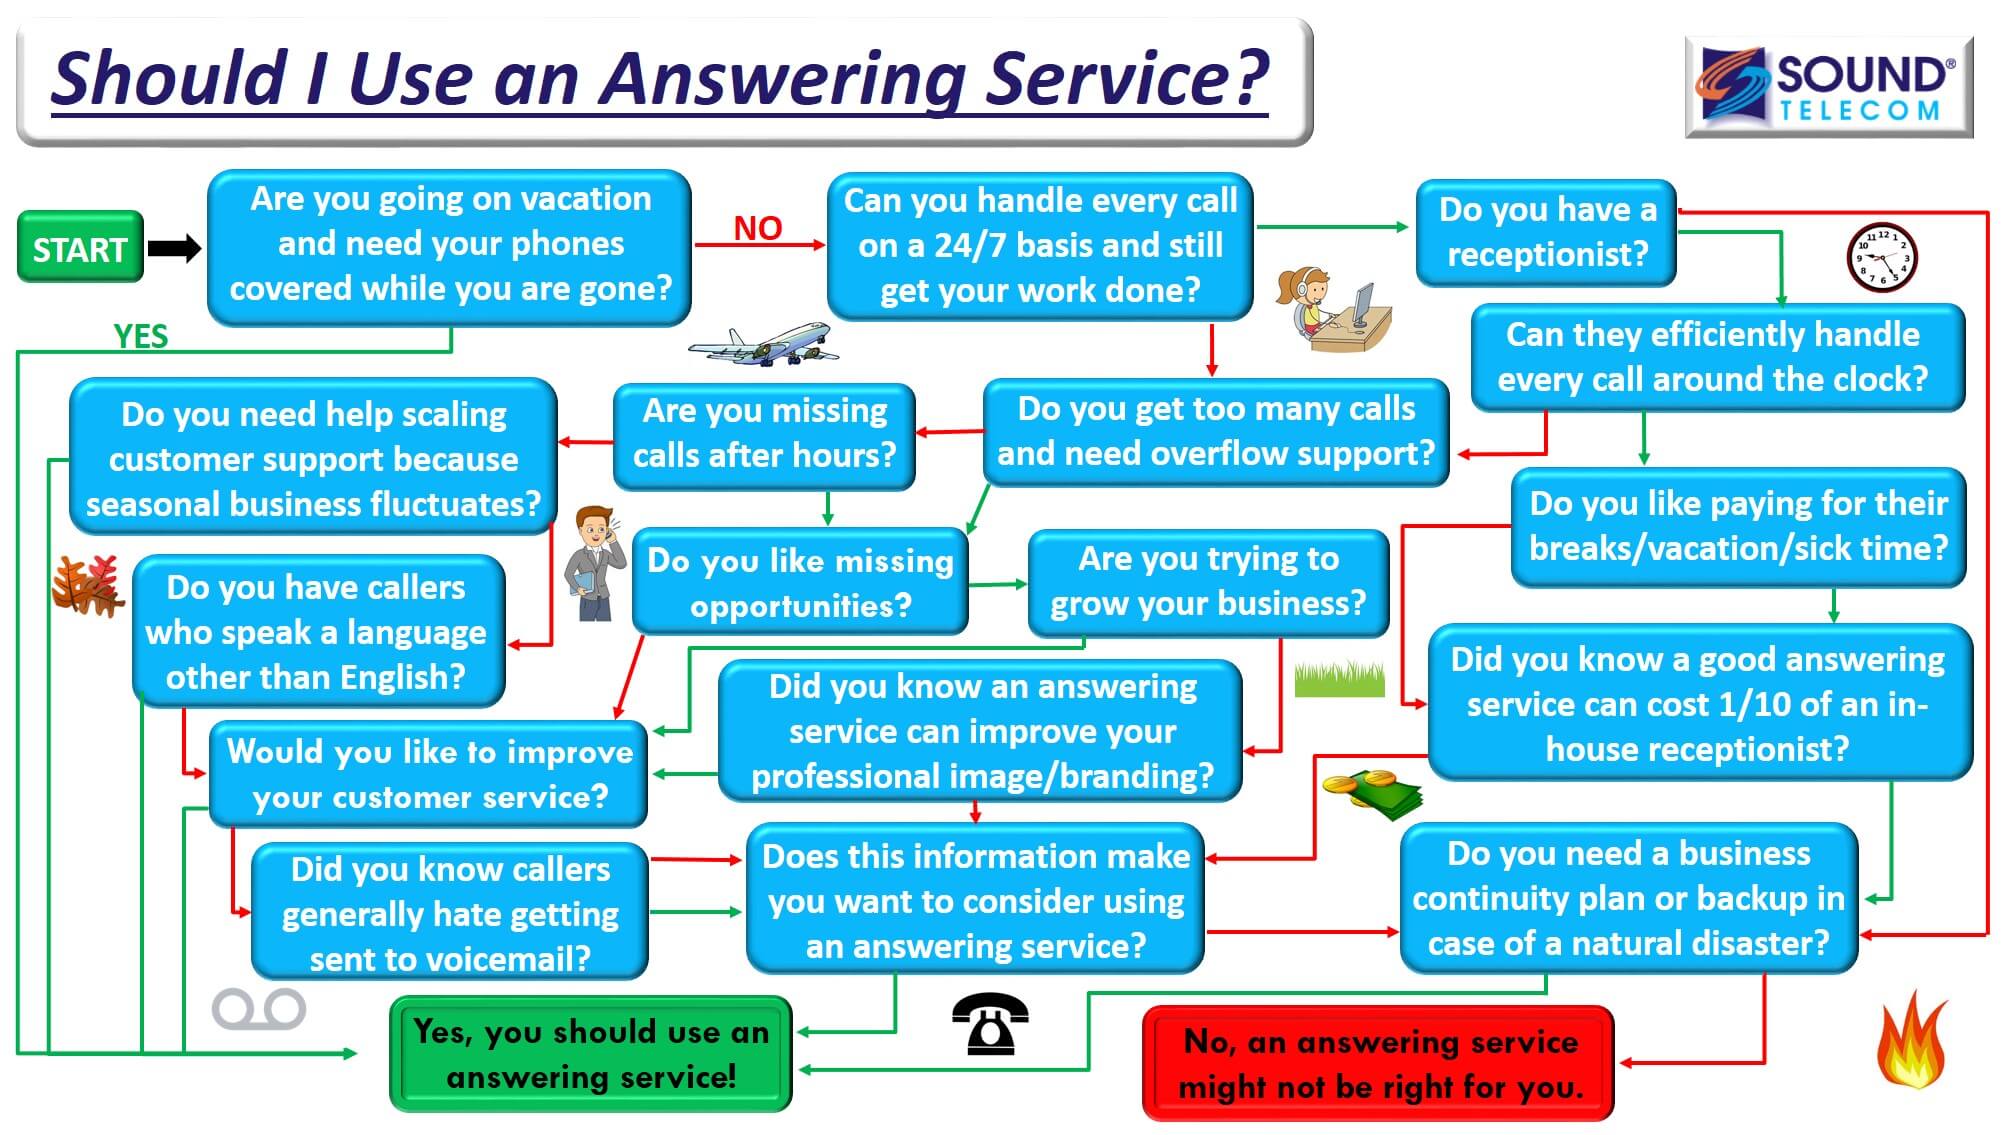 Should I Use an Answering Service?